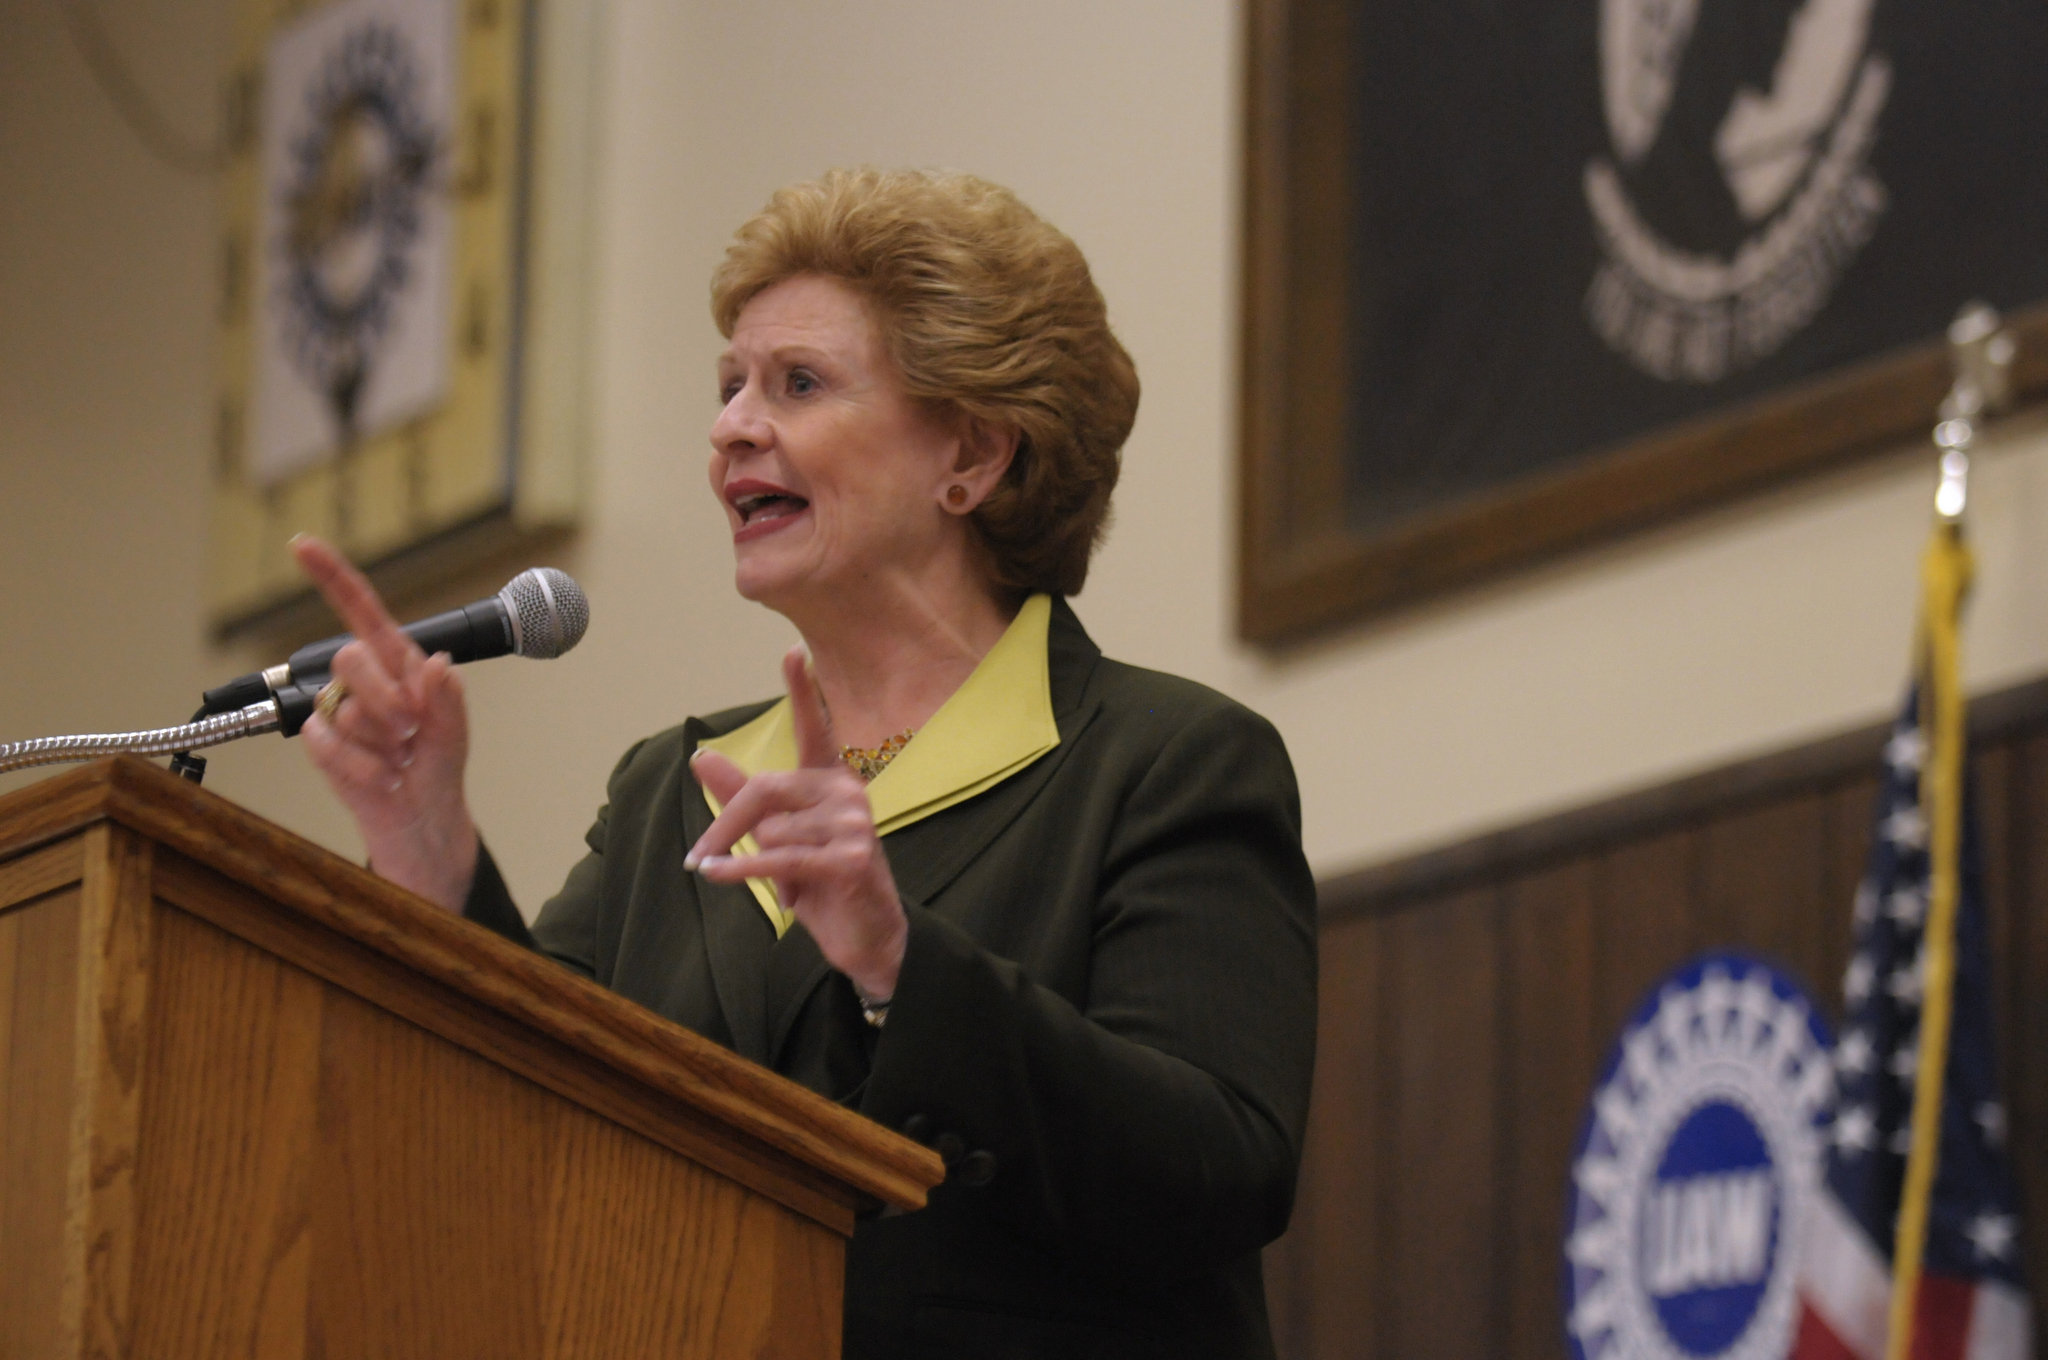 Outside of the Farm Bill Process, Senate Ag Committee Chair Stabenow Proposes Ending Federal Farm Safety Net Program